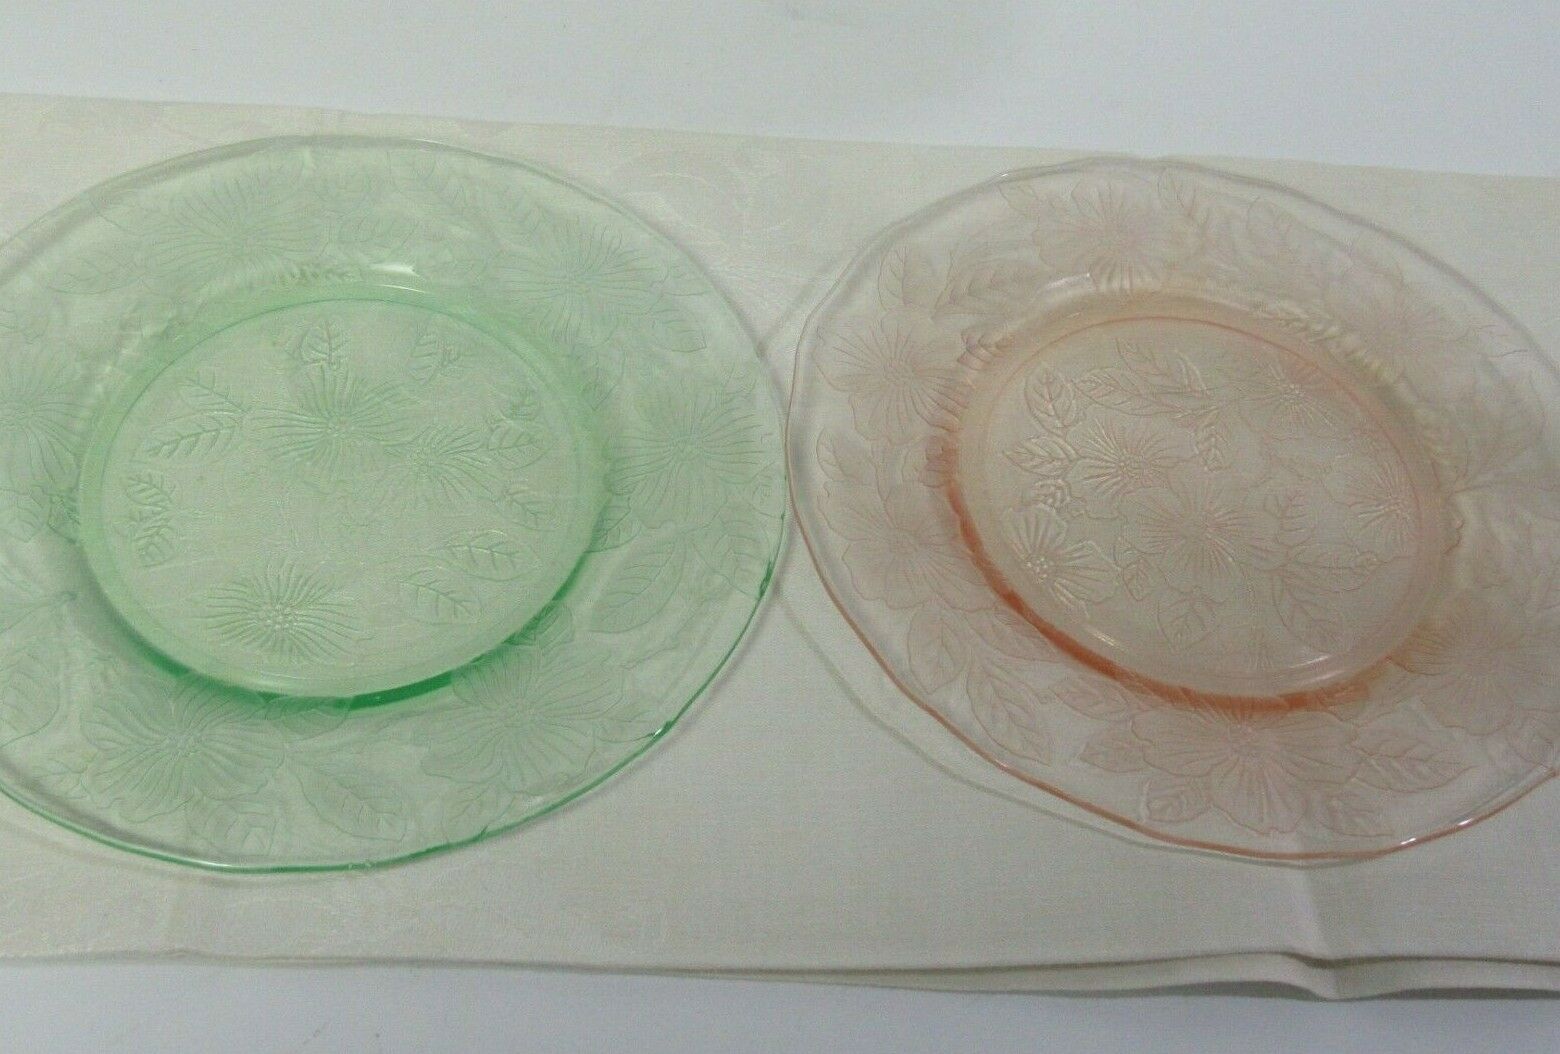 2 Macbeth-evans Dogwood Depression Glass Plates Pink Green 8" Made In Usa